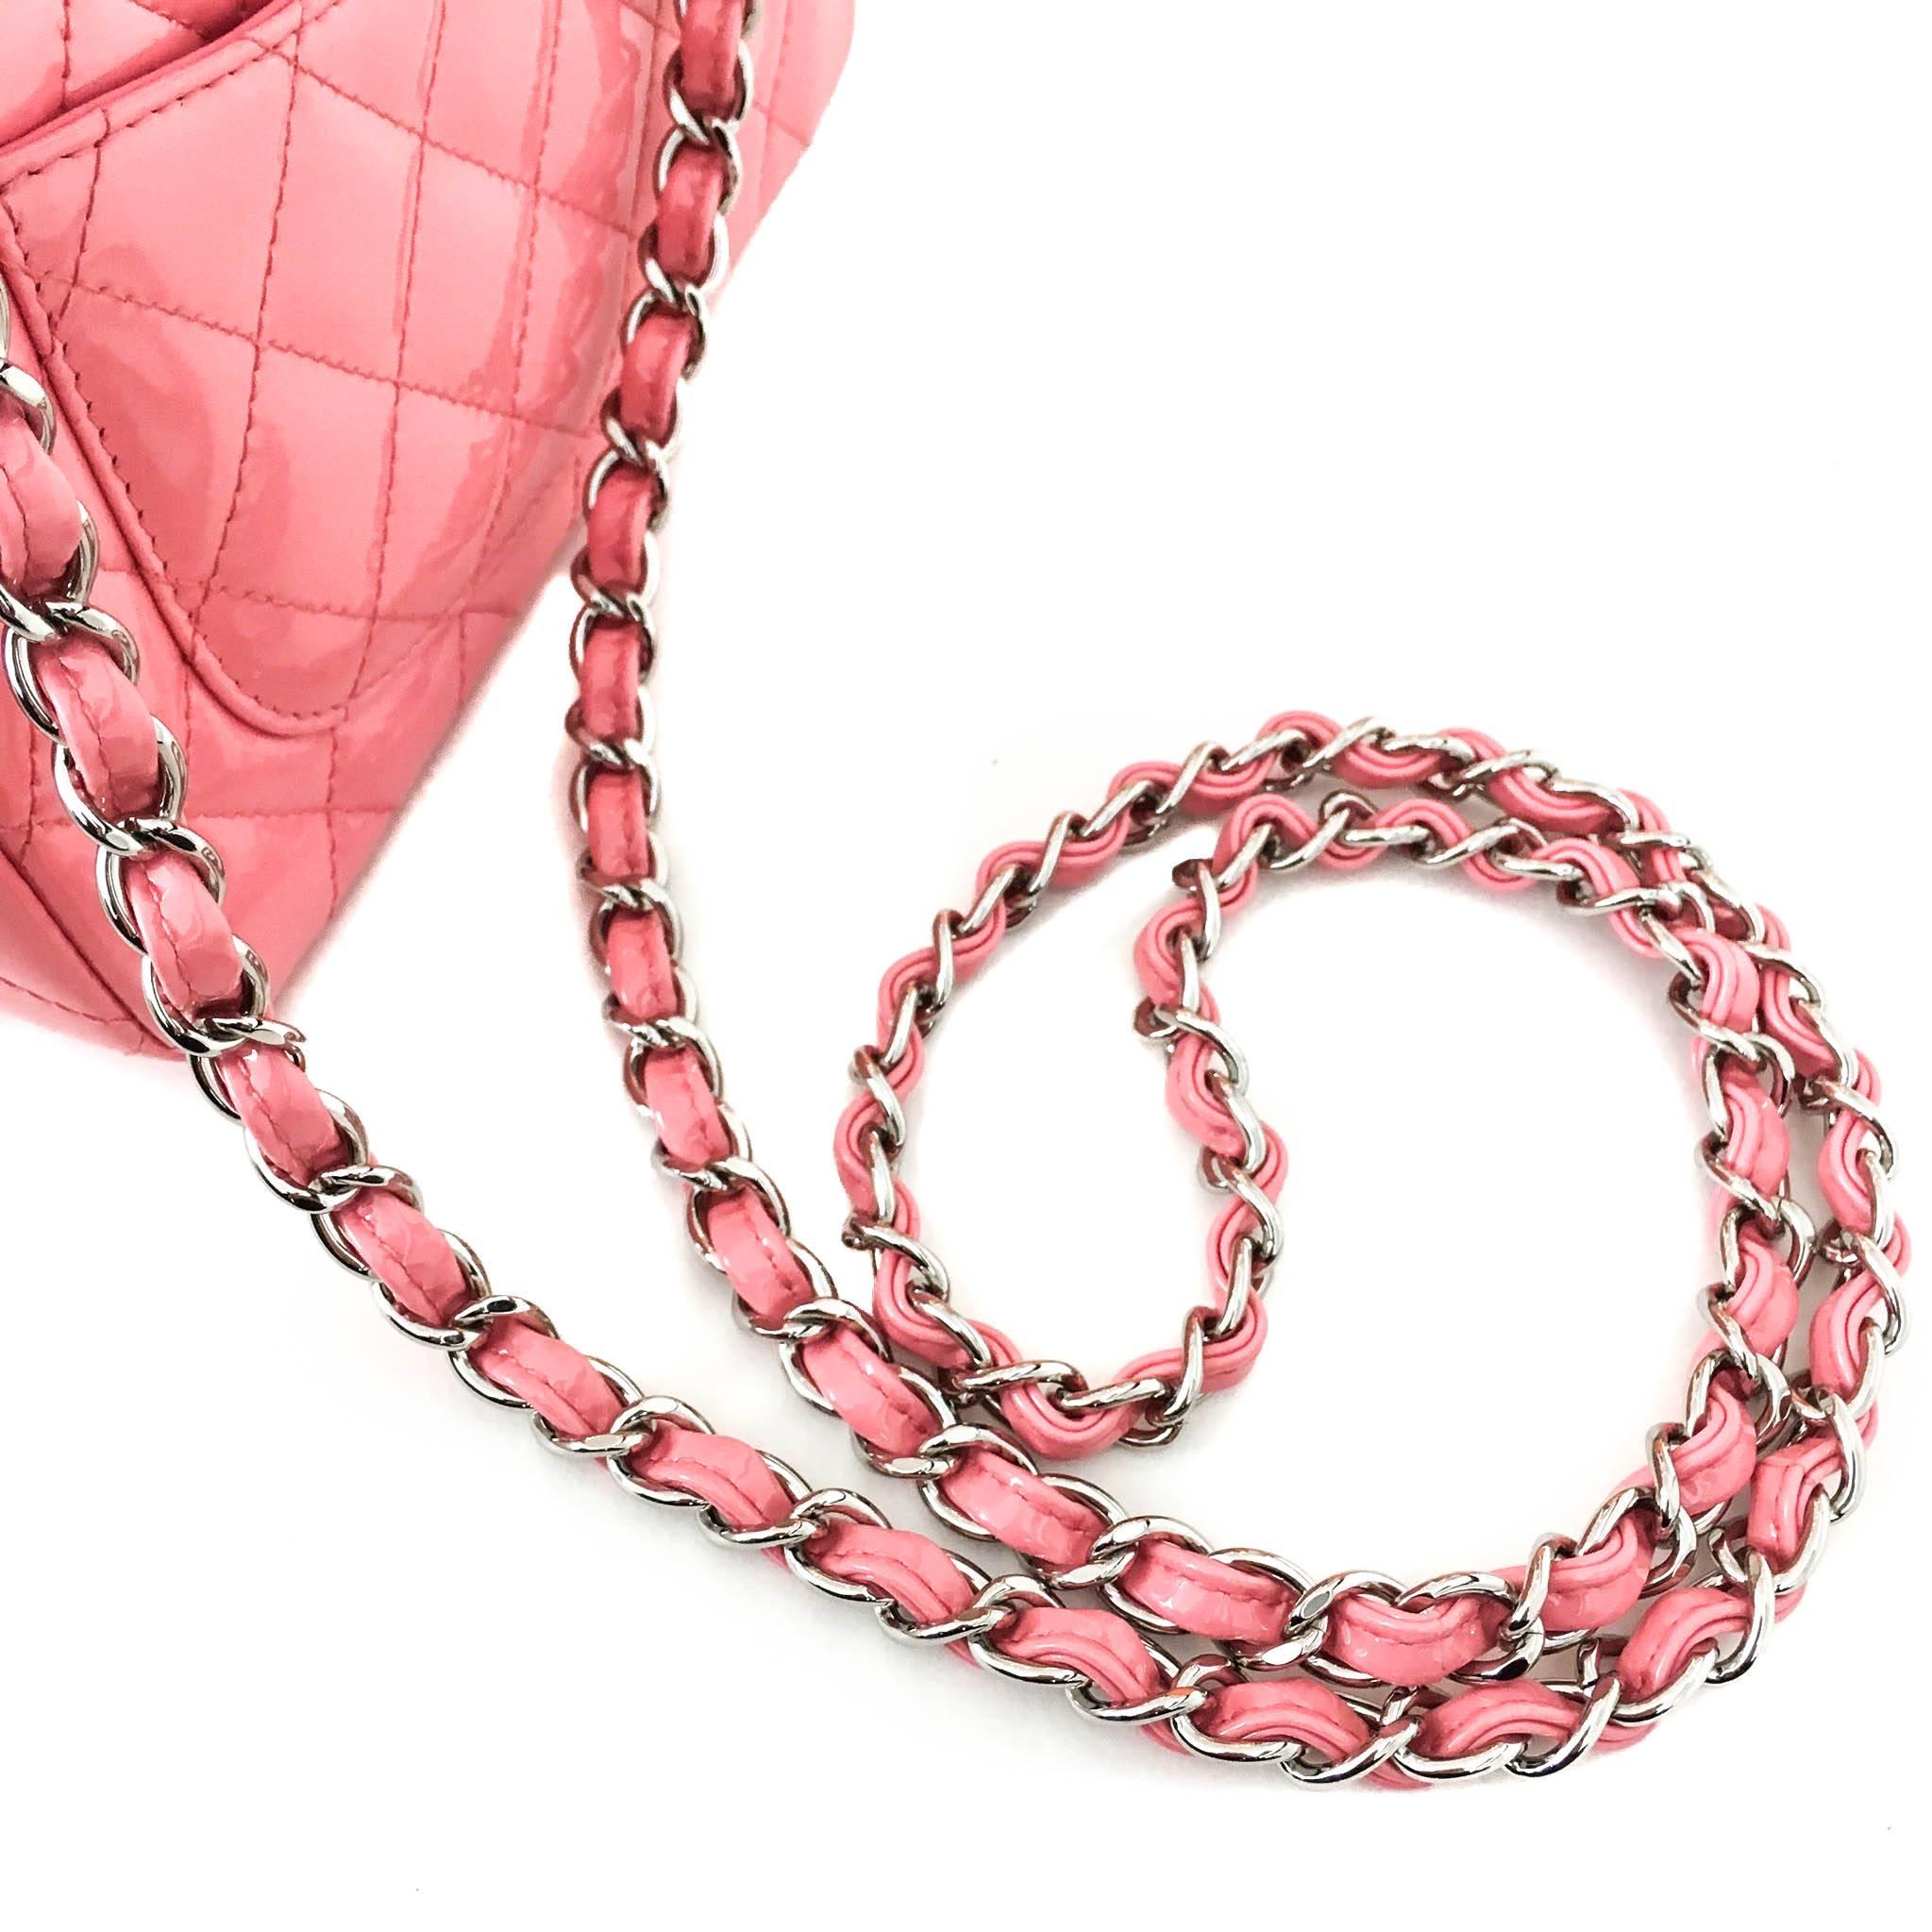 Chanel Mini rectangle crossbody Flap Bag in pink quilted patent leather For Sale 3